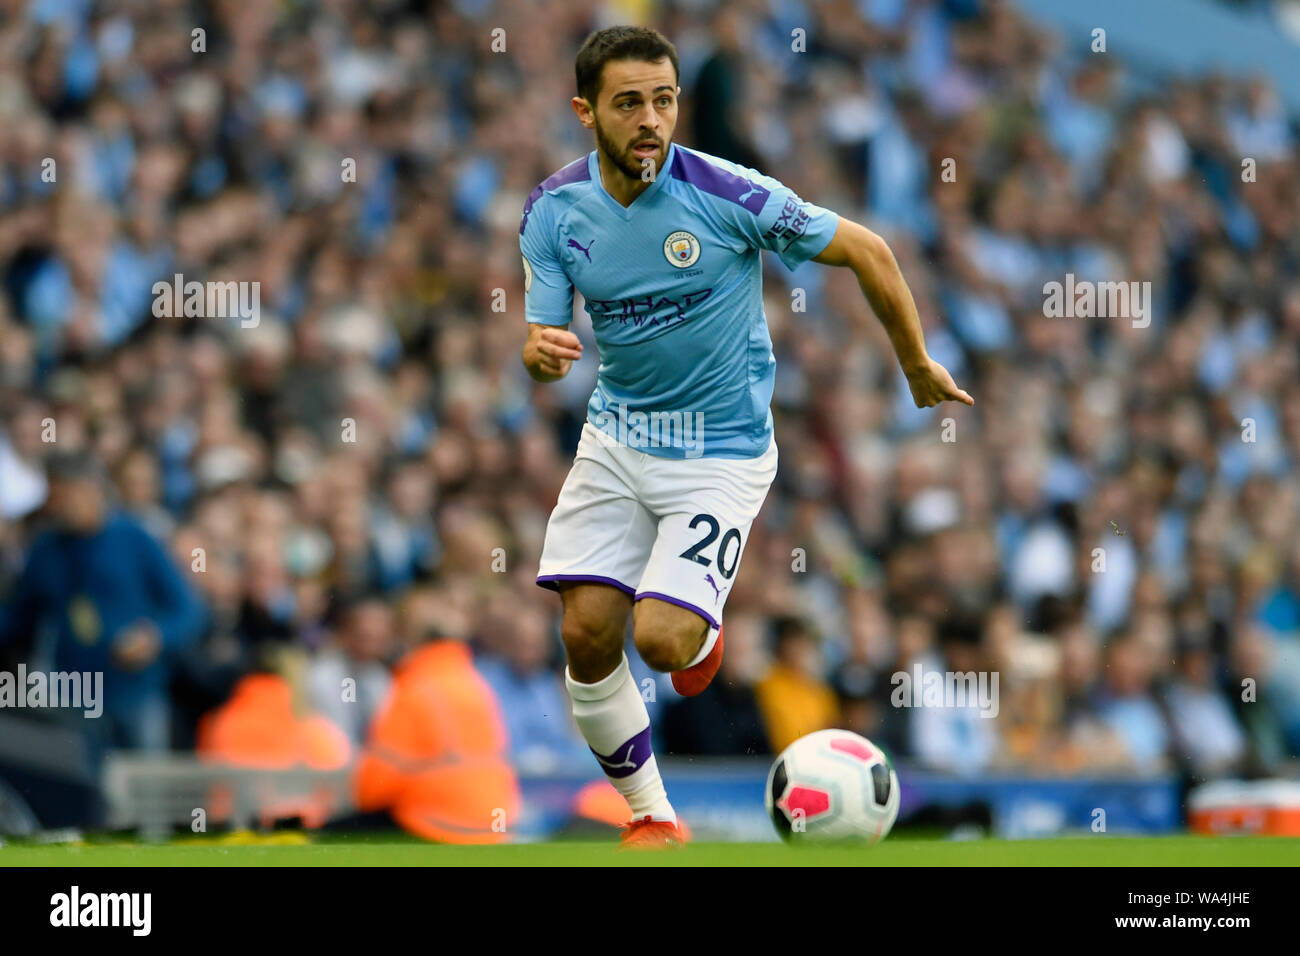 17th August 2019; Etihad Stadium, Manchester, Greater Manchester, England; Manchester City versus Tottenham Hotspur; Bernardo Silva of Manchester City breaks forward with the ball - Strictly Editorial Use Only. No use with unauthorized audio, video, data, fixture lists, club/league logos or 'live' services. Online in-match use limited to 120 images, no video emulation. Stock Photo